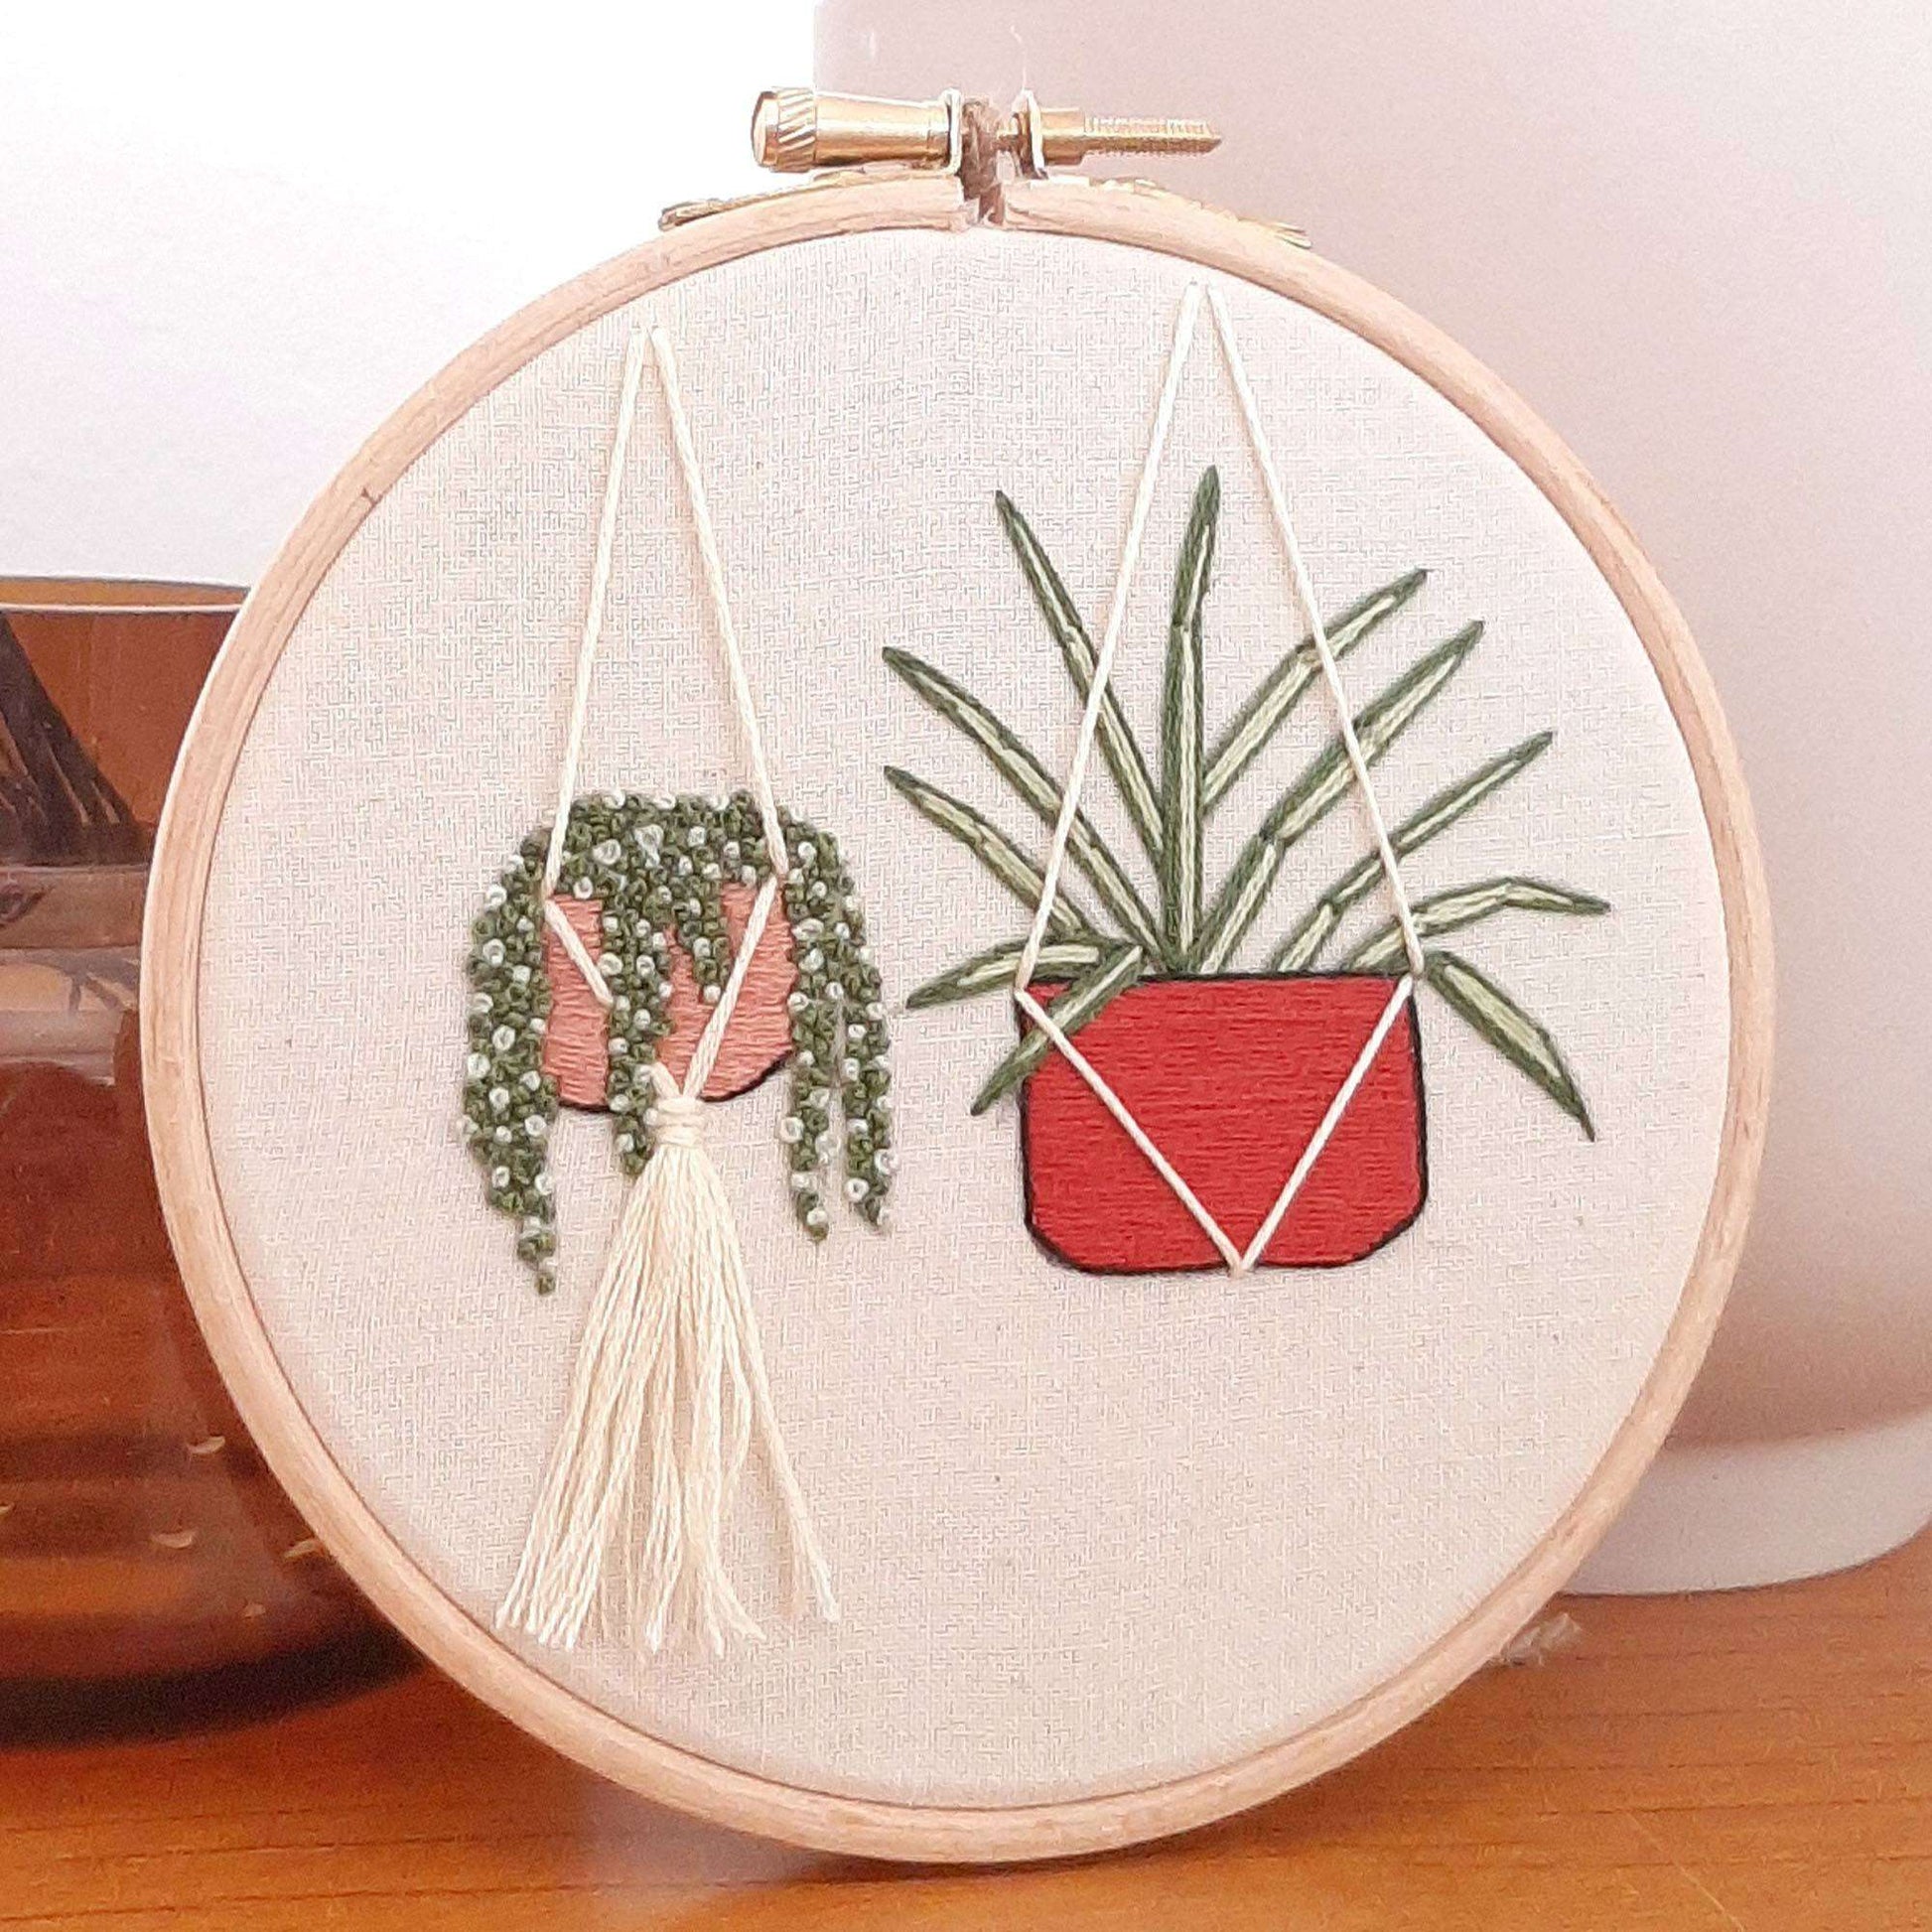 Free Anchor Macrame Hanging Plants Embroidered Design Embroidery Pattern